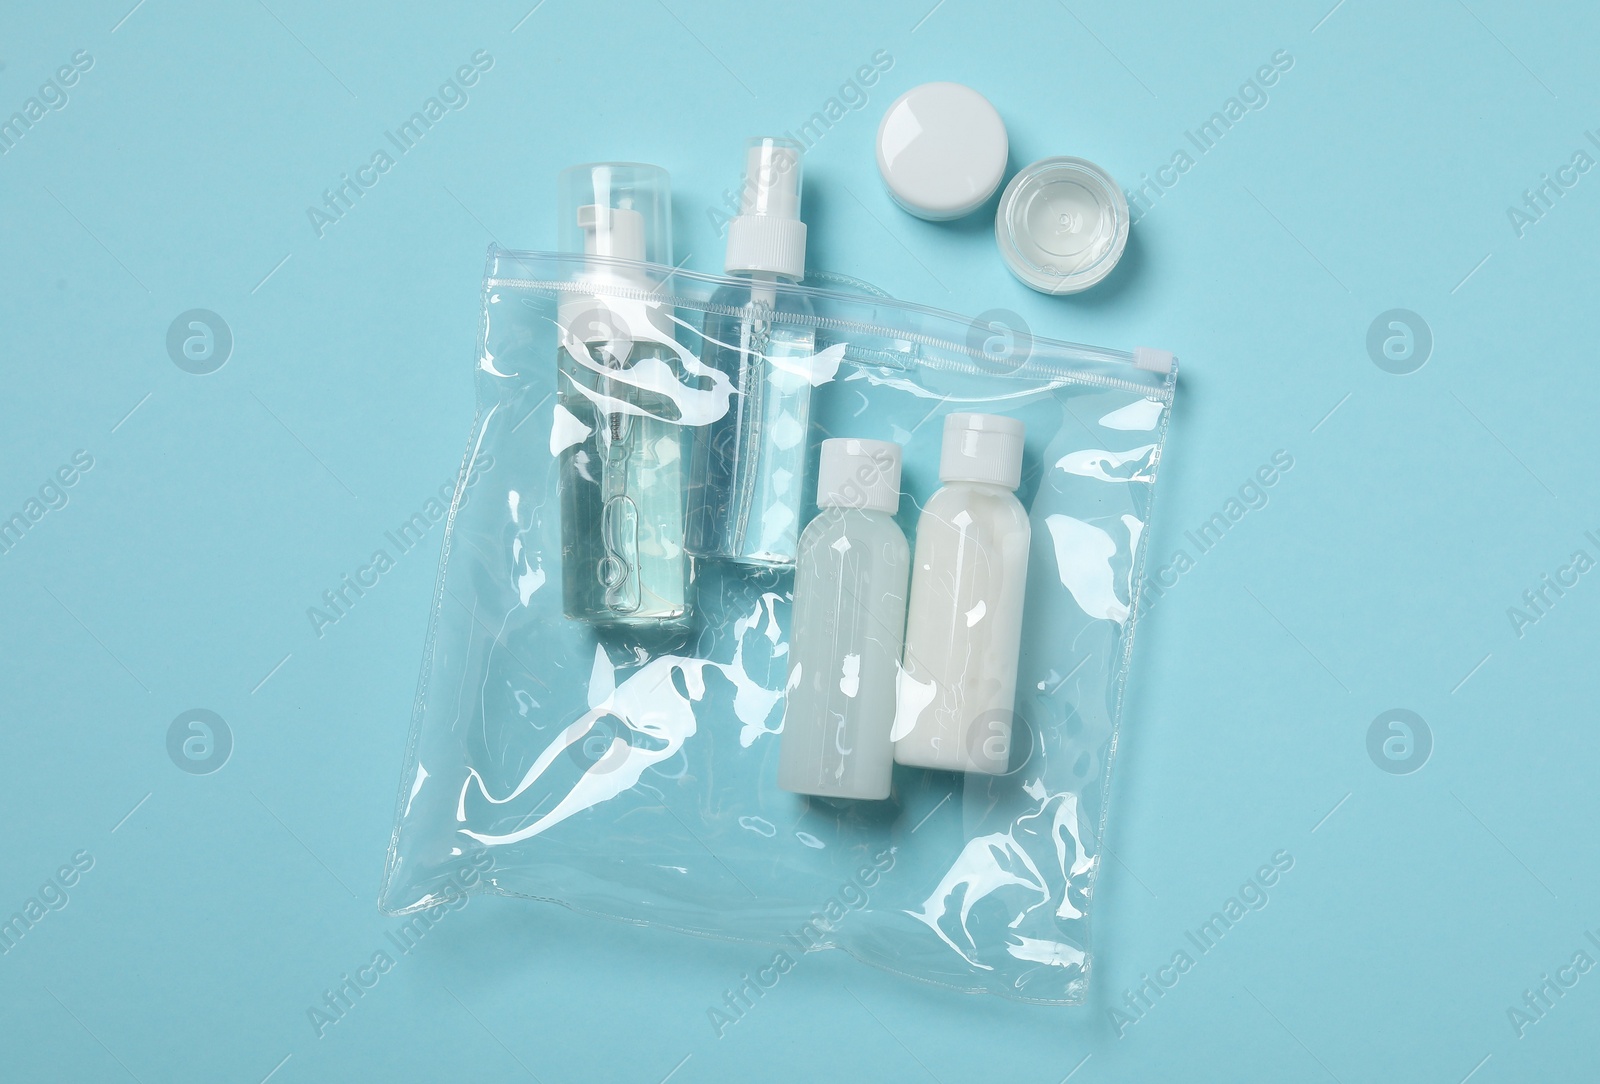 Photo of Cosmetic travel kit on light blue background, top view. Bath accessories